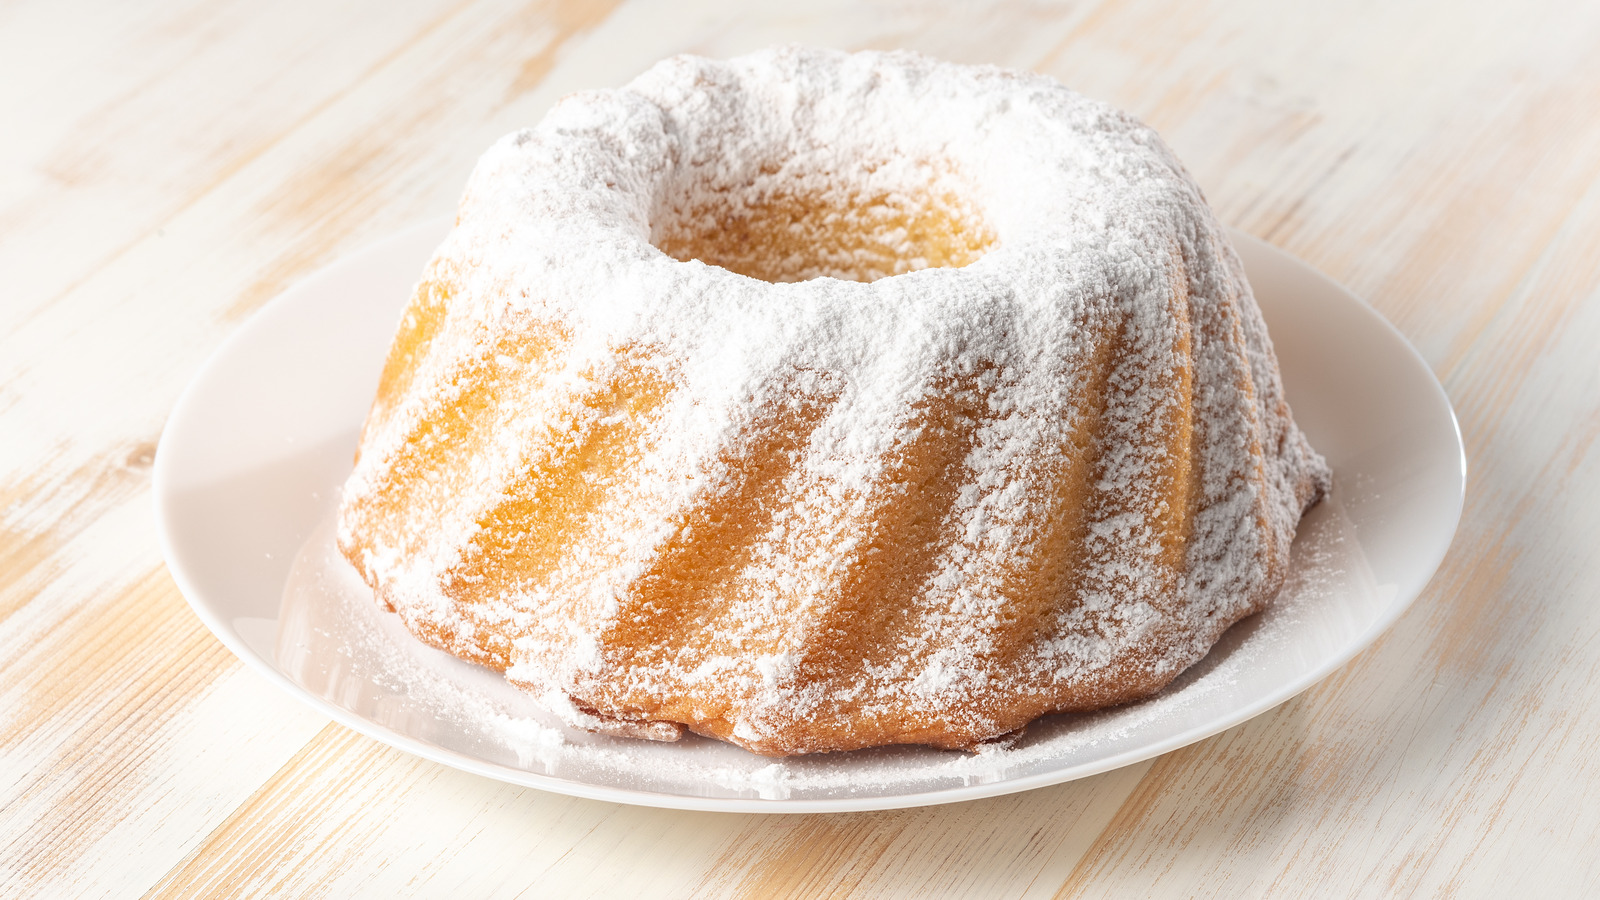 About Preventing Cakes From Getting Stuck in Bundt Cake Pans